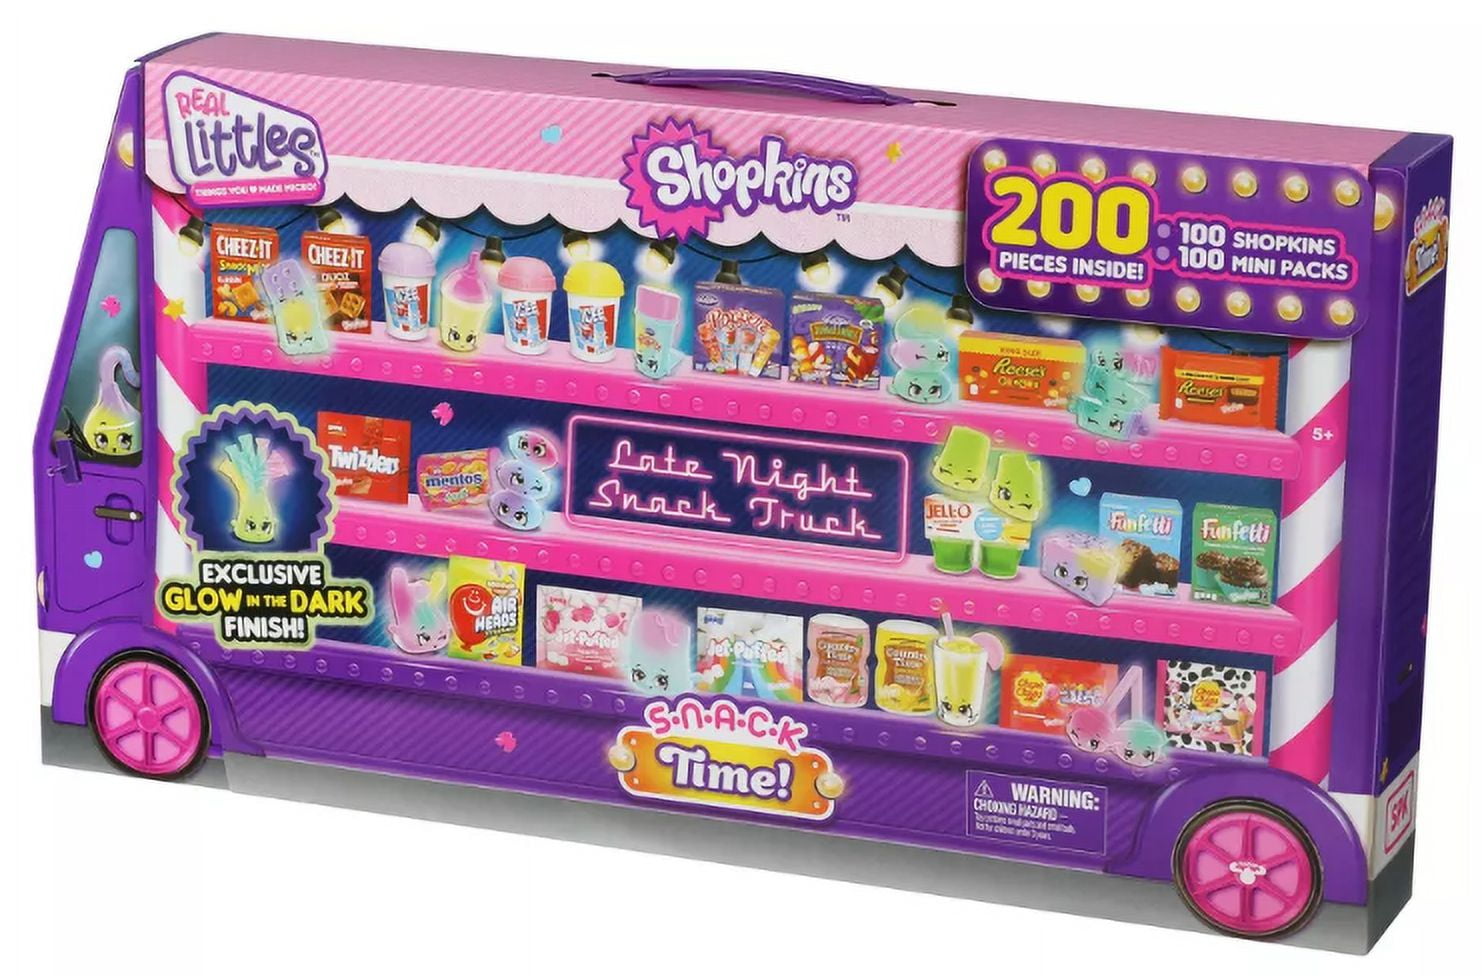 Shopkins Real Littles Snack Time Multipack 200 pieces 100 Shopkins